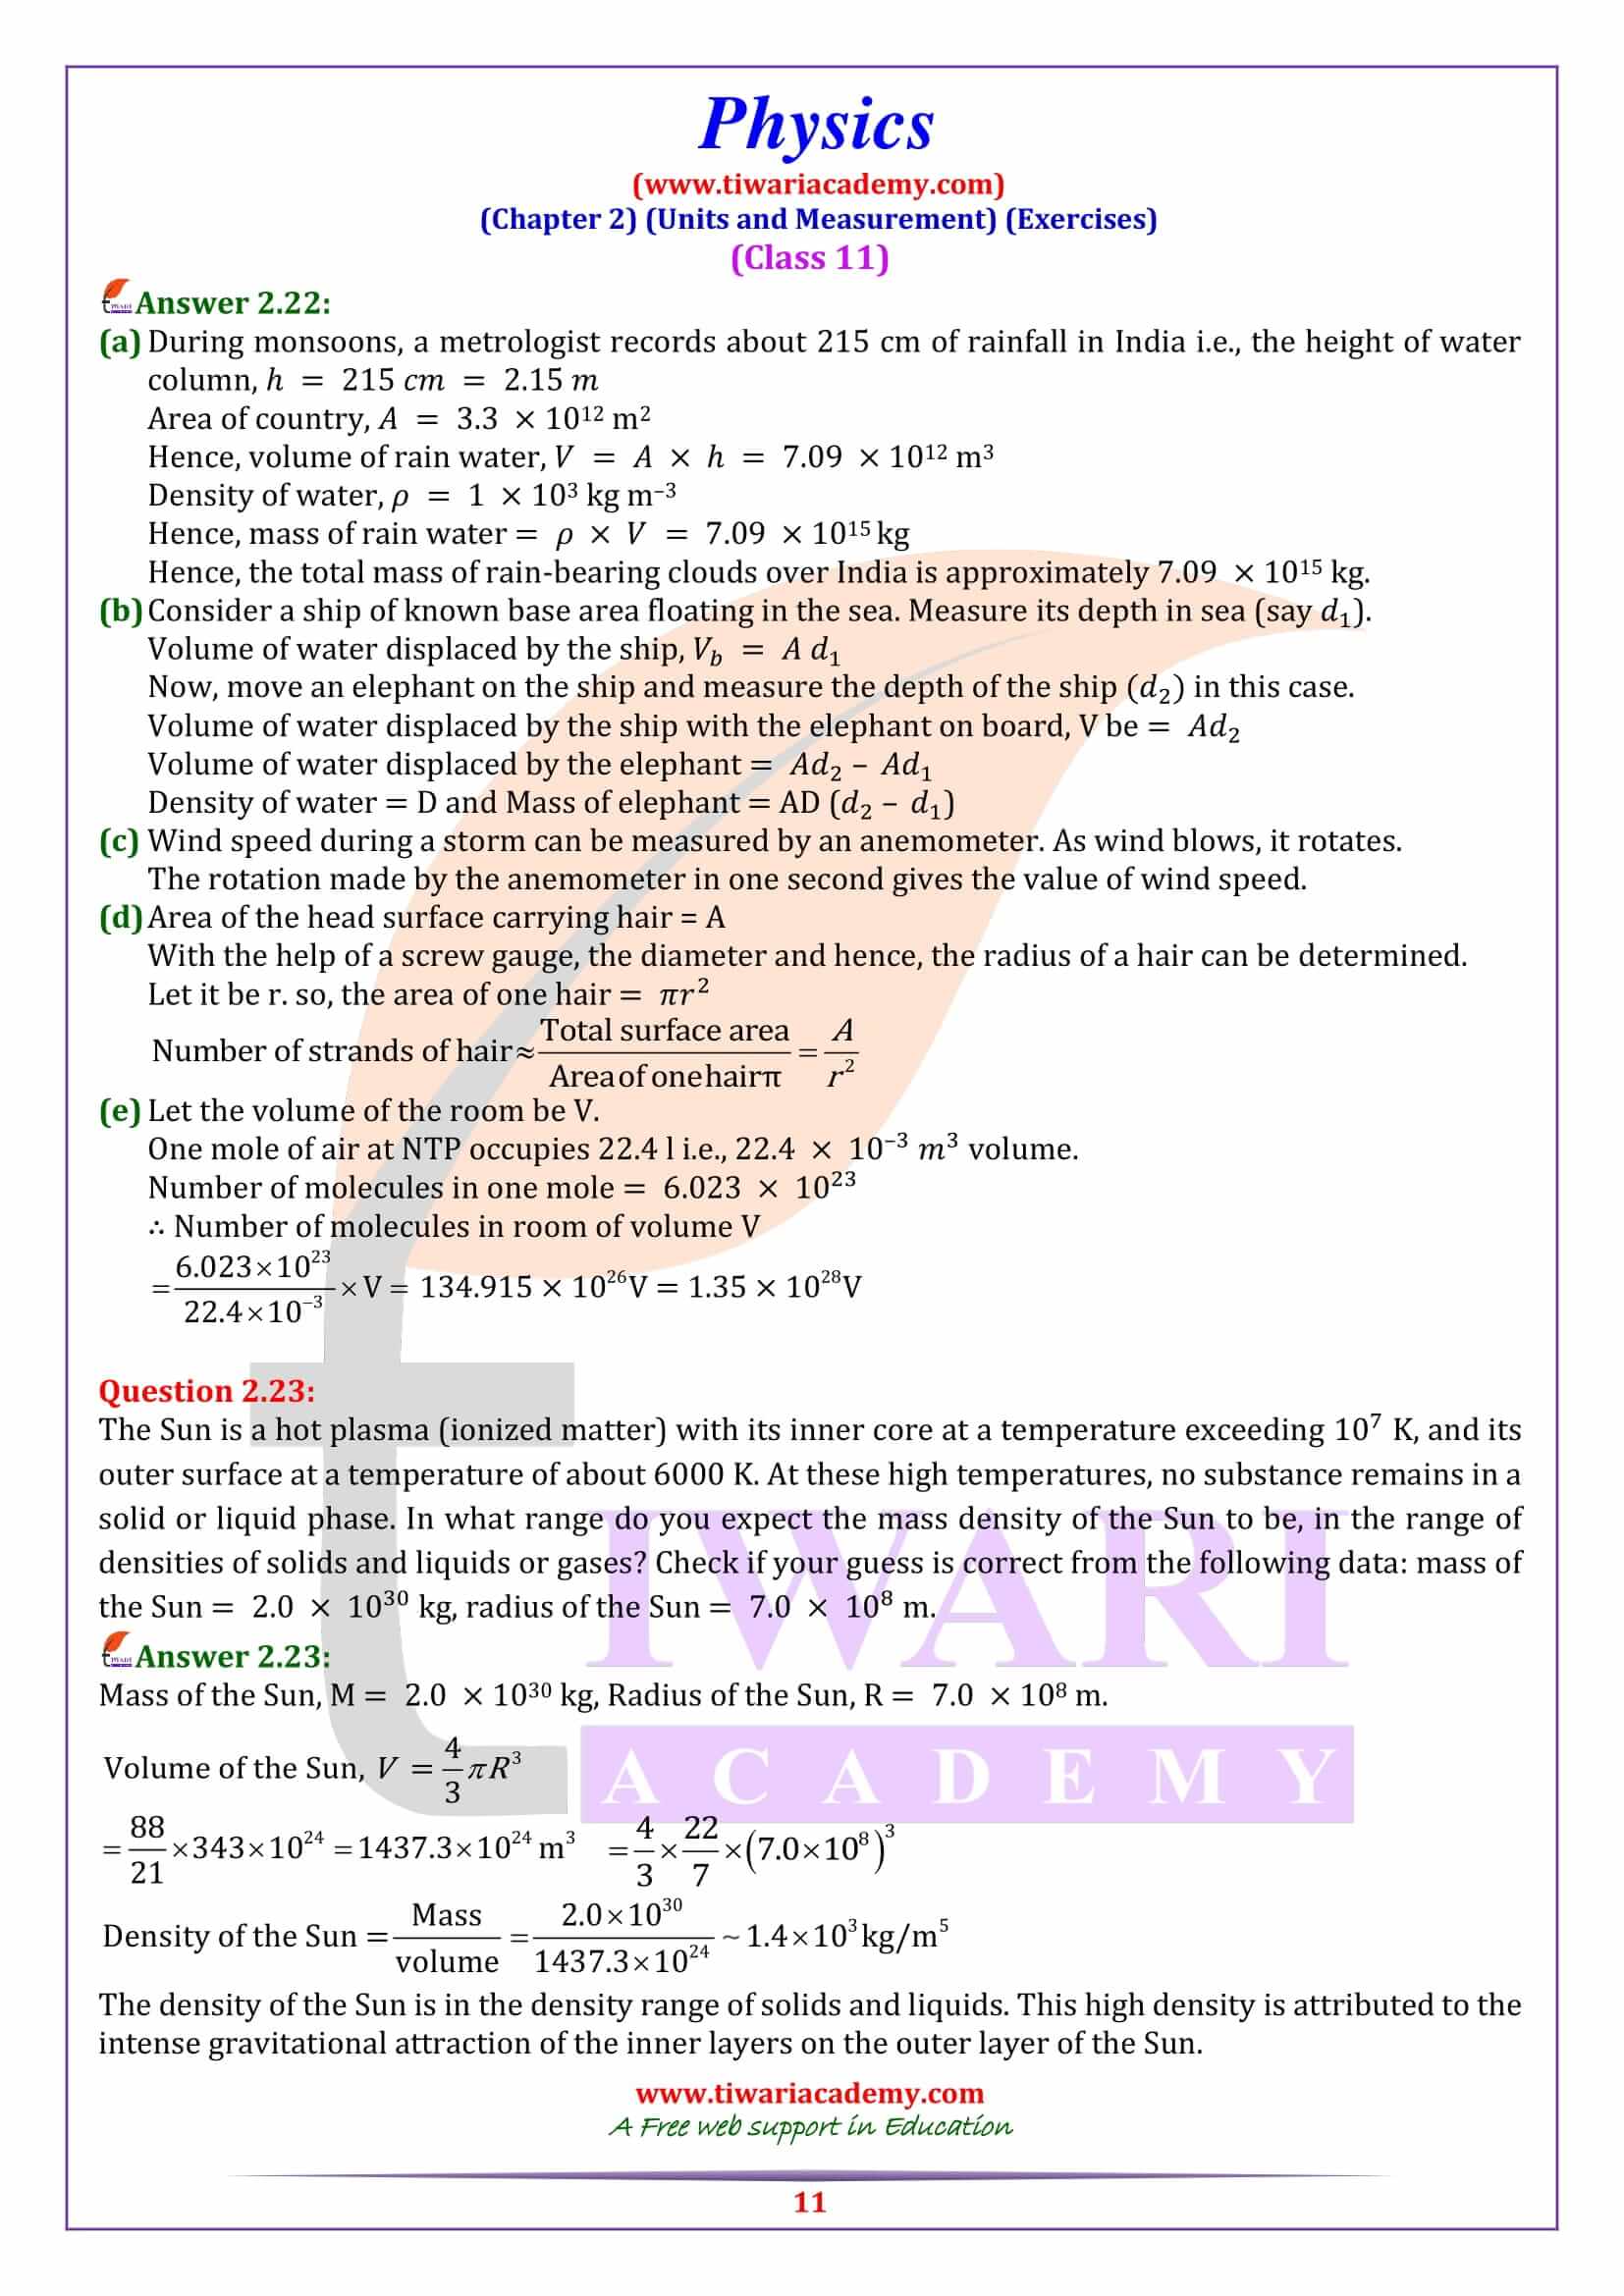 Class 11 Physics Chapter 2 PDF download